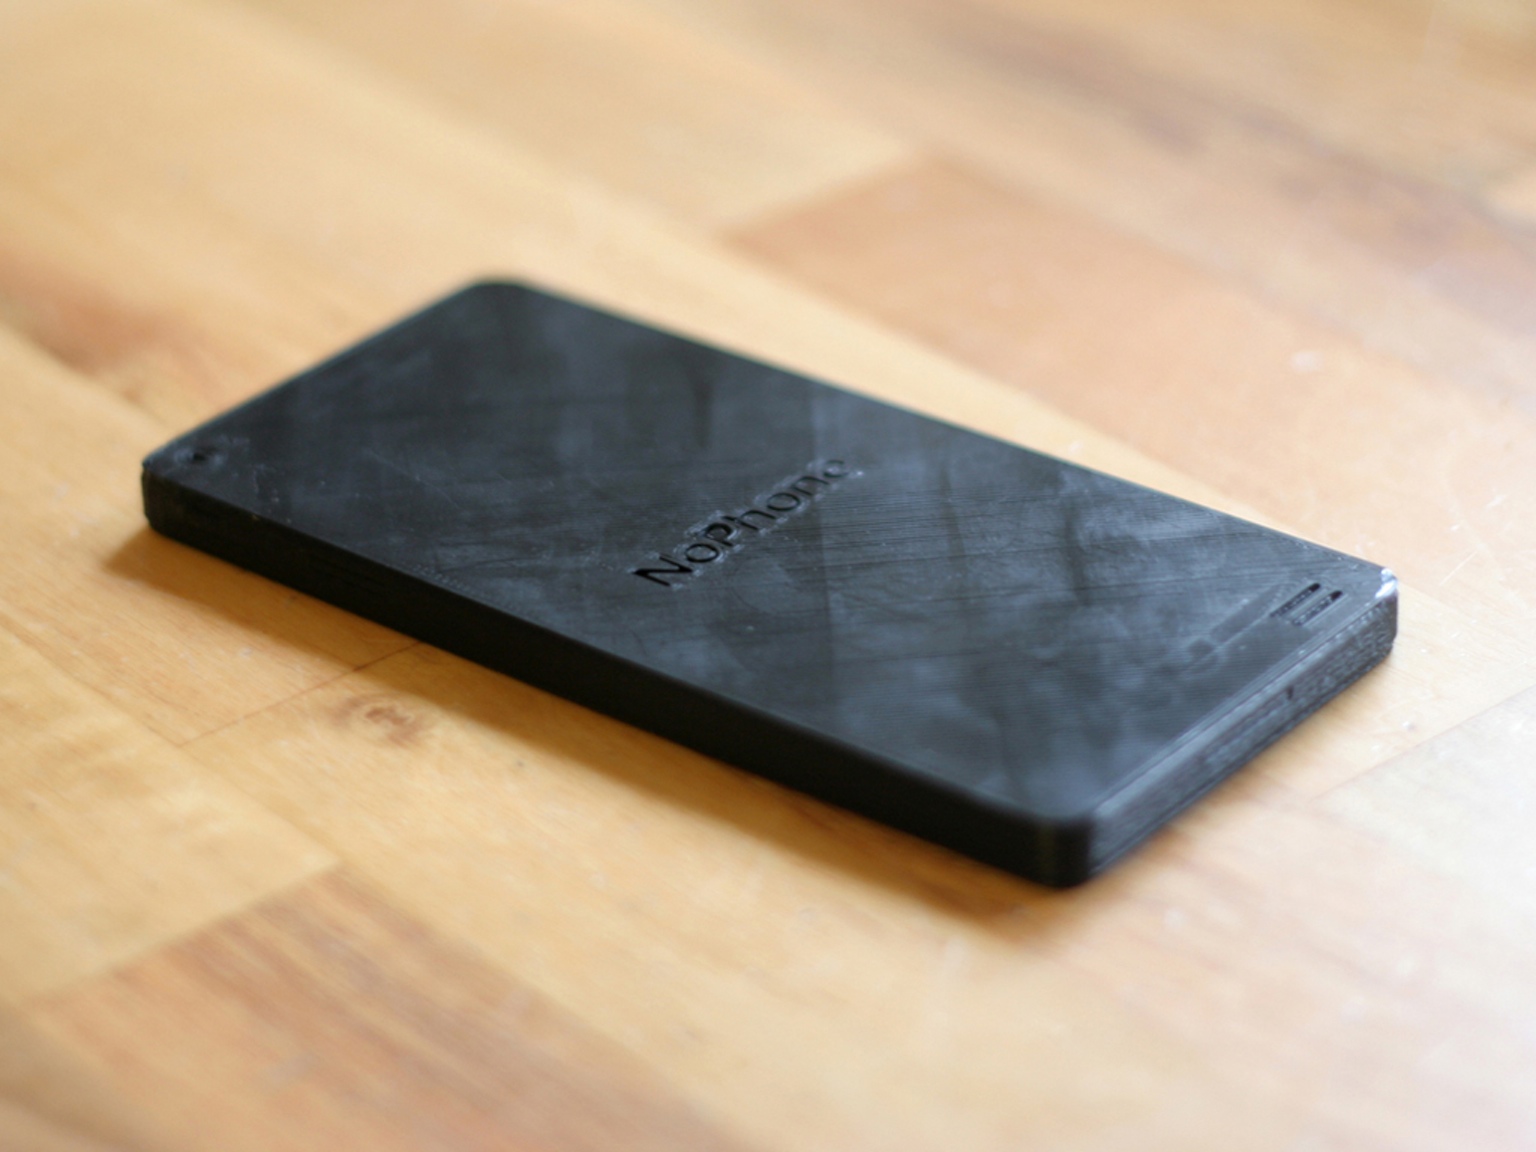 NoPhone the successful gadget that does absolutely nothing